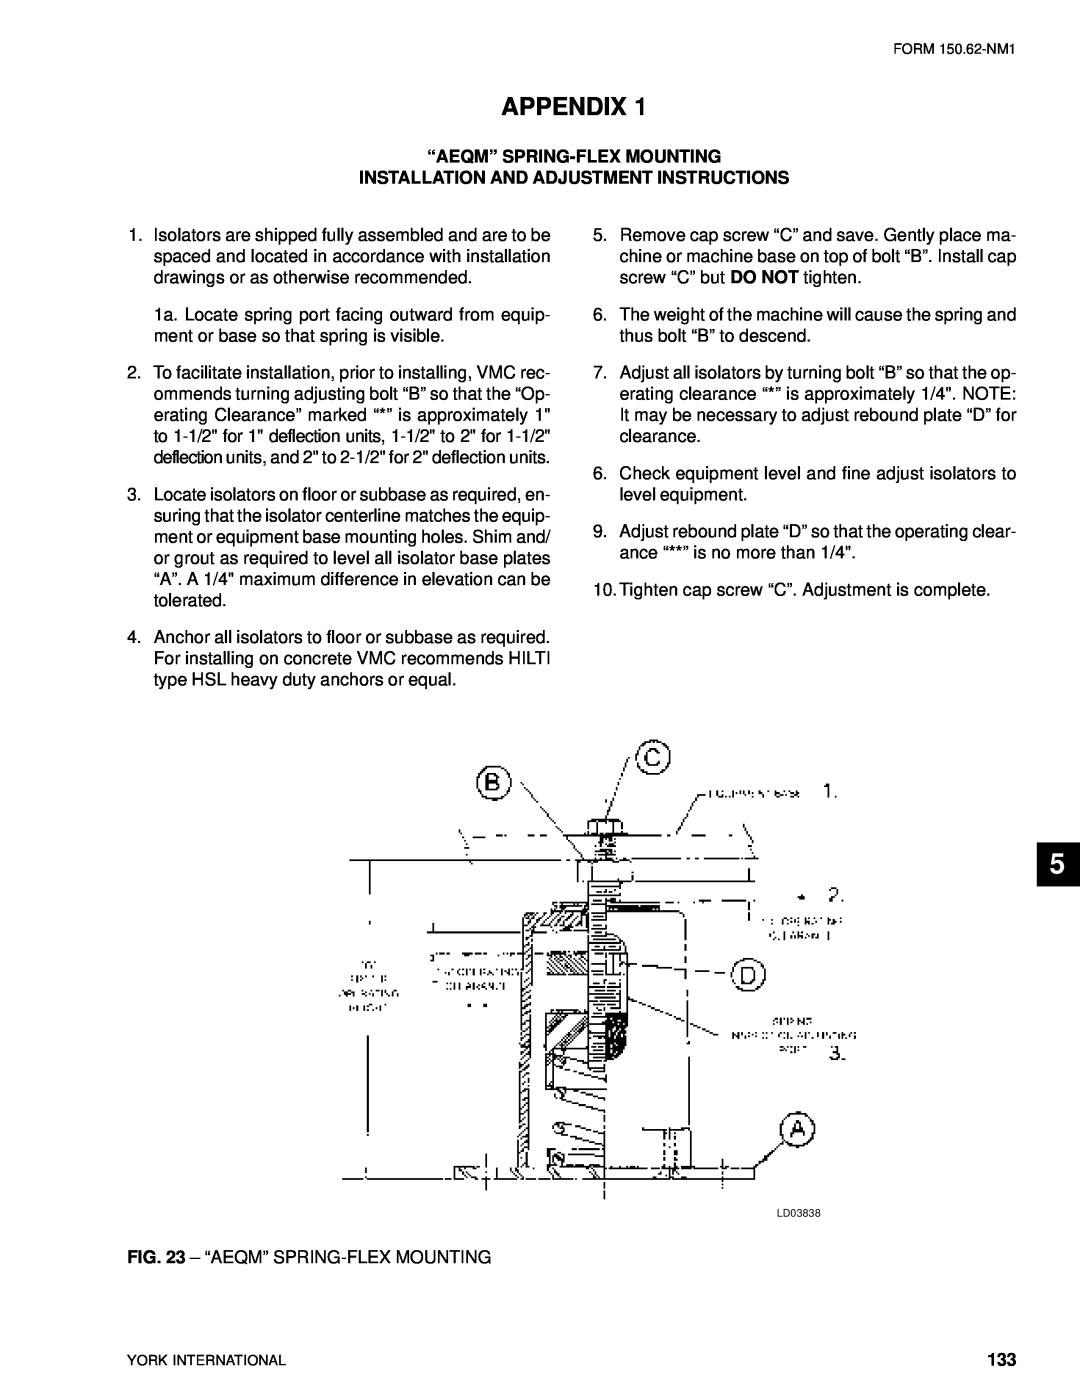 York YCAL0080SC, YCAL0014SC manual Appendix, “Aeqm” Spring-Flexmounting, Installation And Adjustment Instructions 